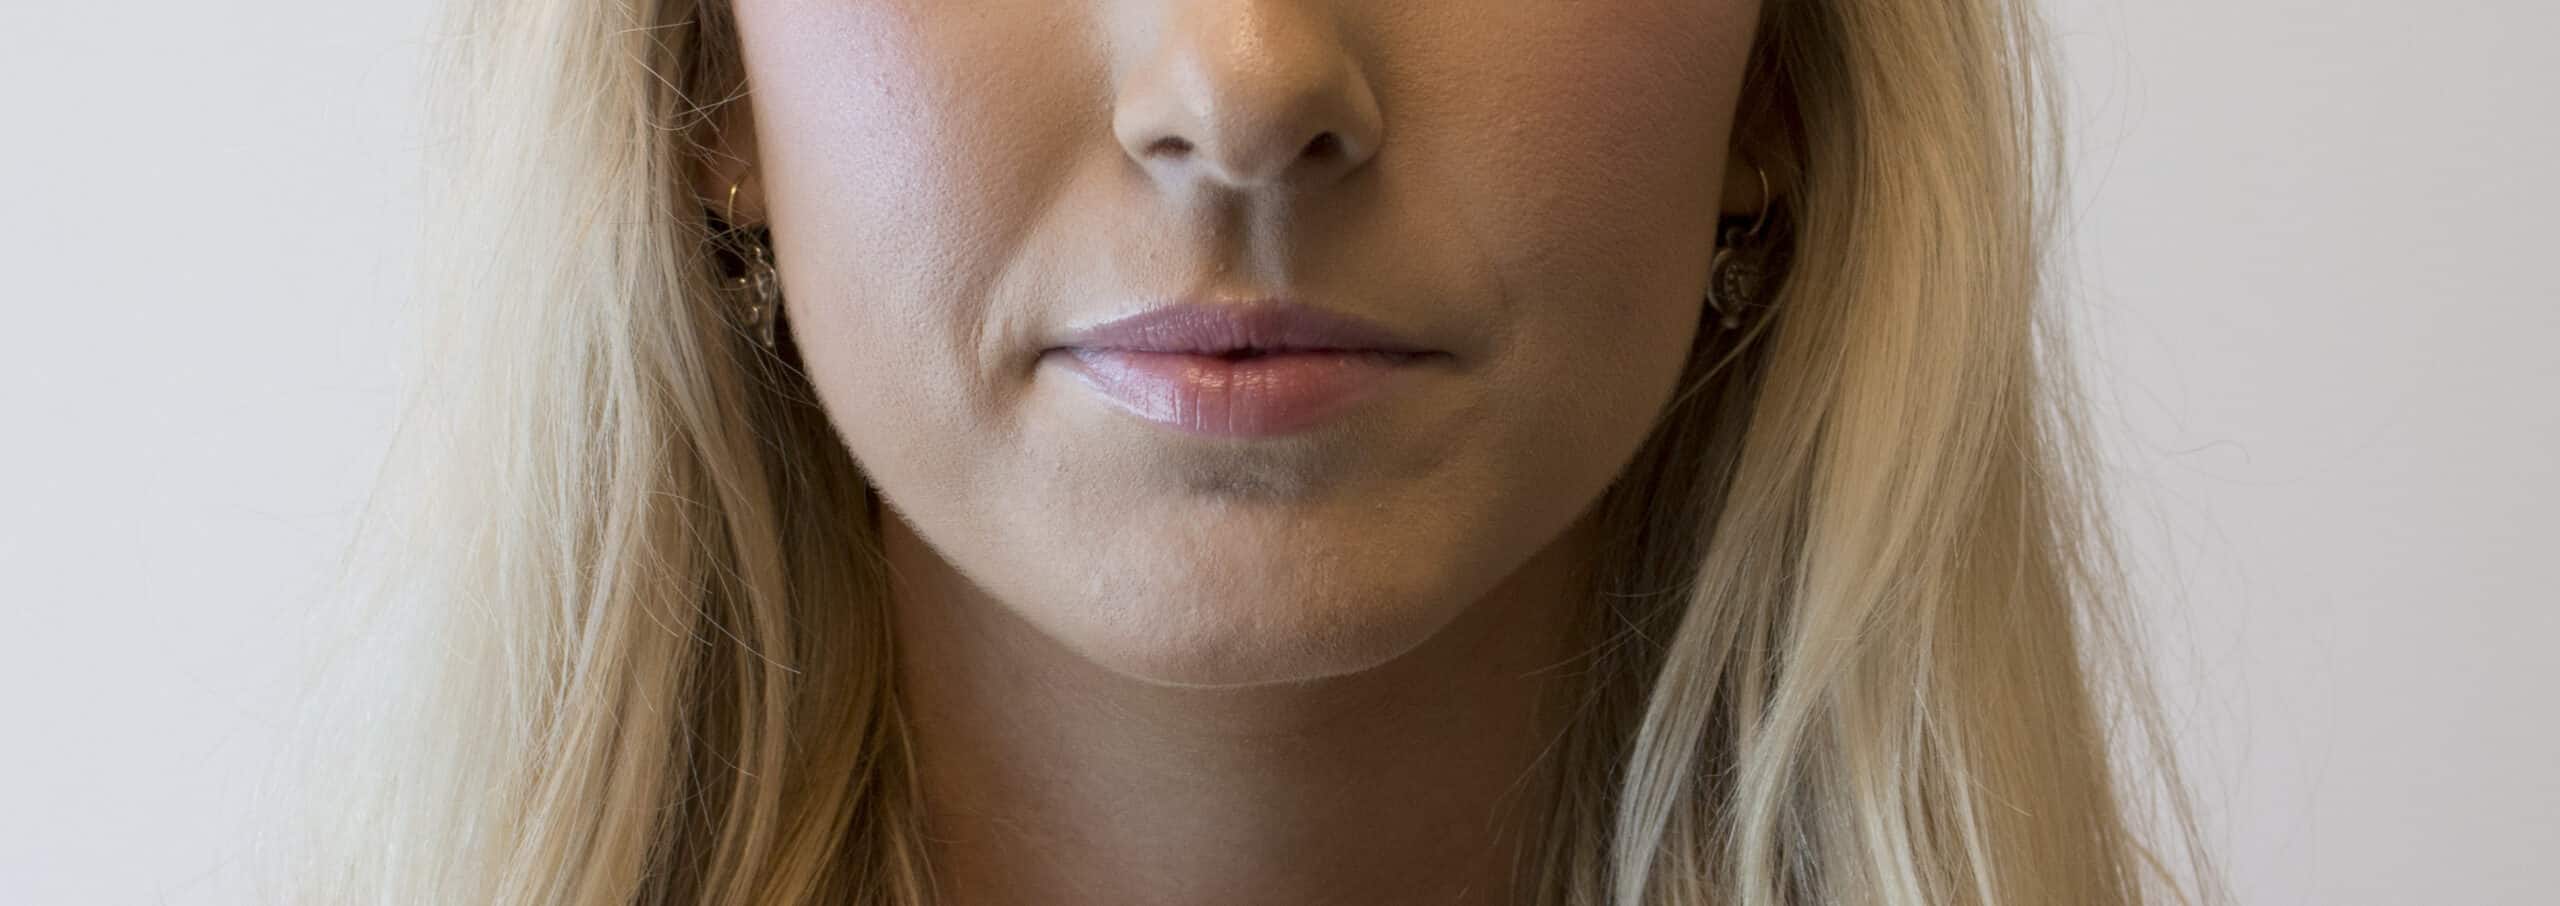 Face of a woman before receiving botox